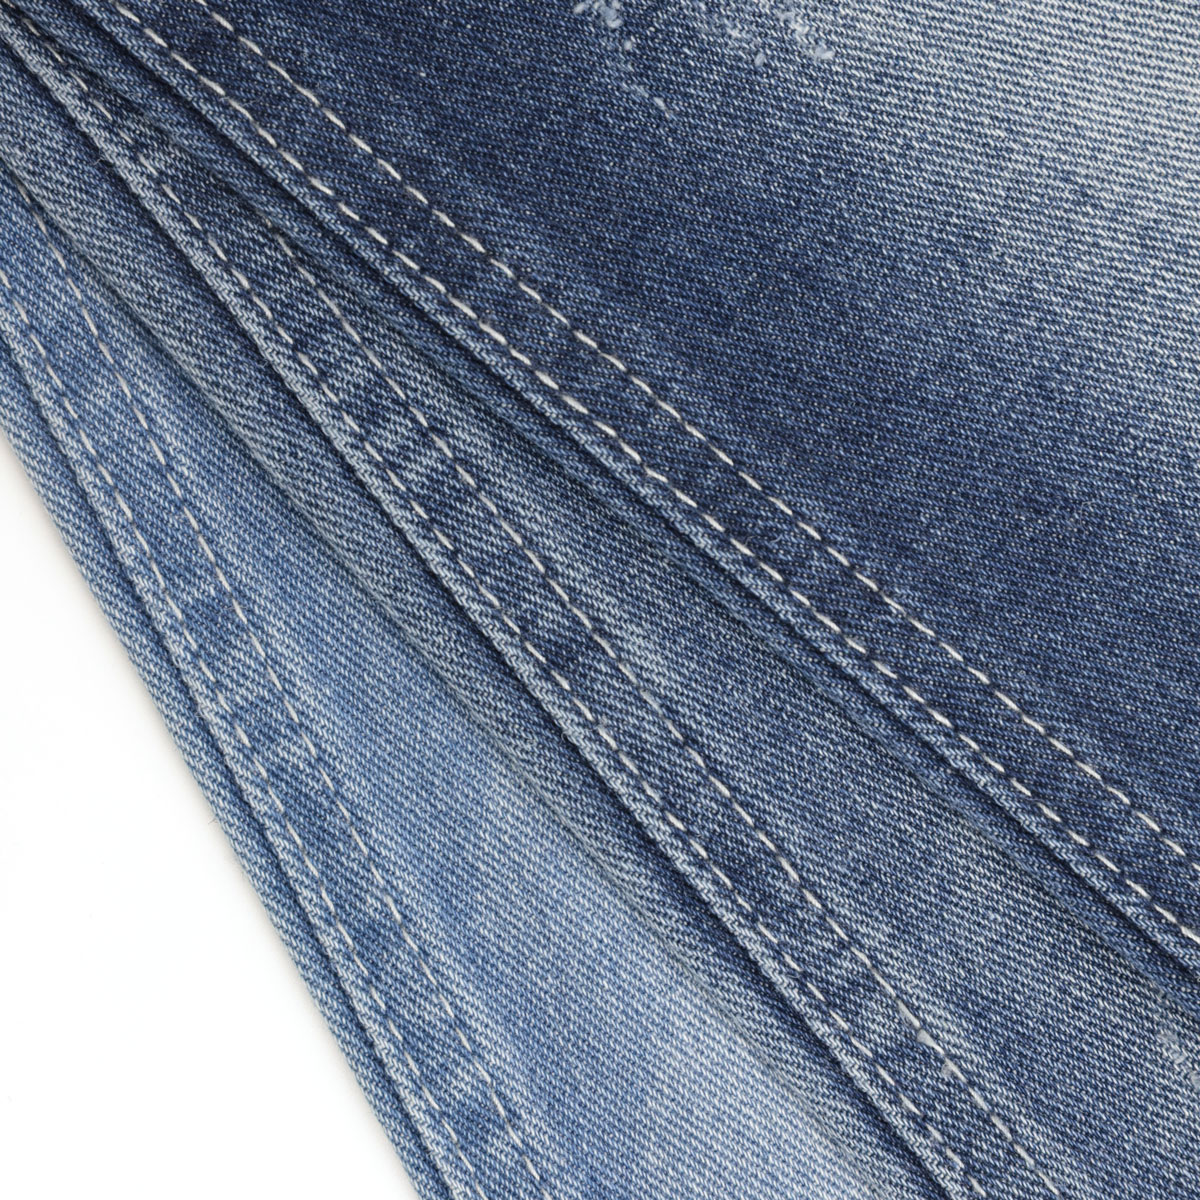 15 Ways to Wear Denim in Fall, Winter, and Spring 1